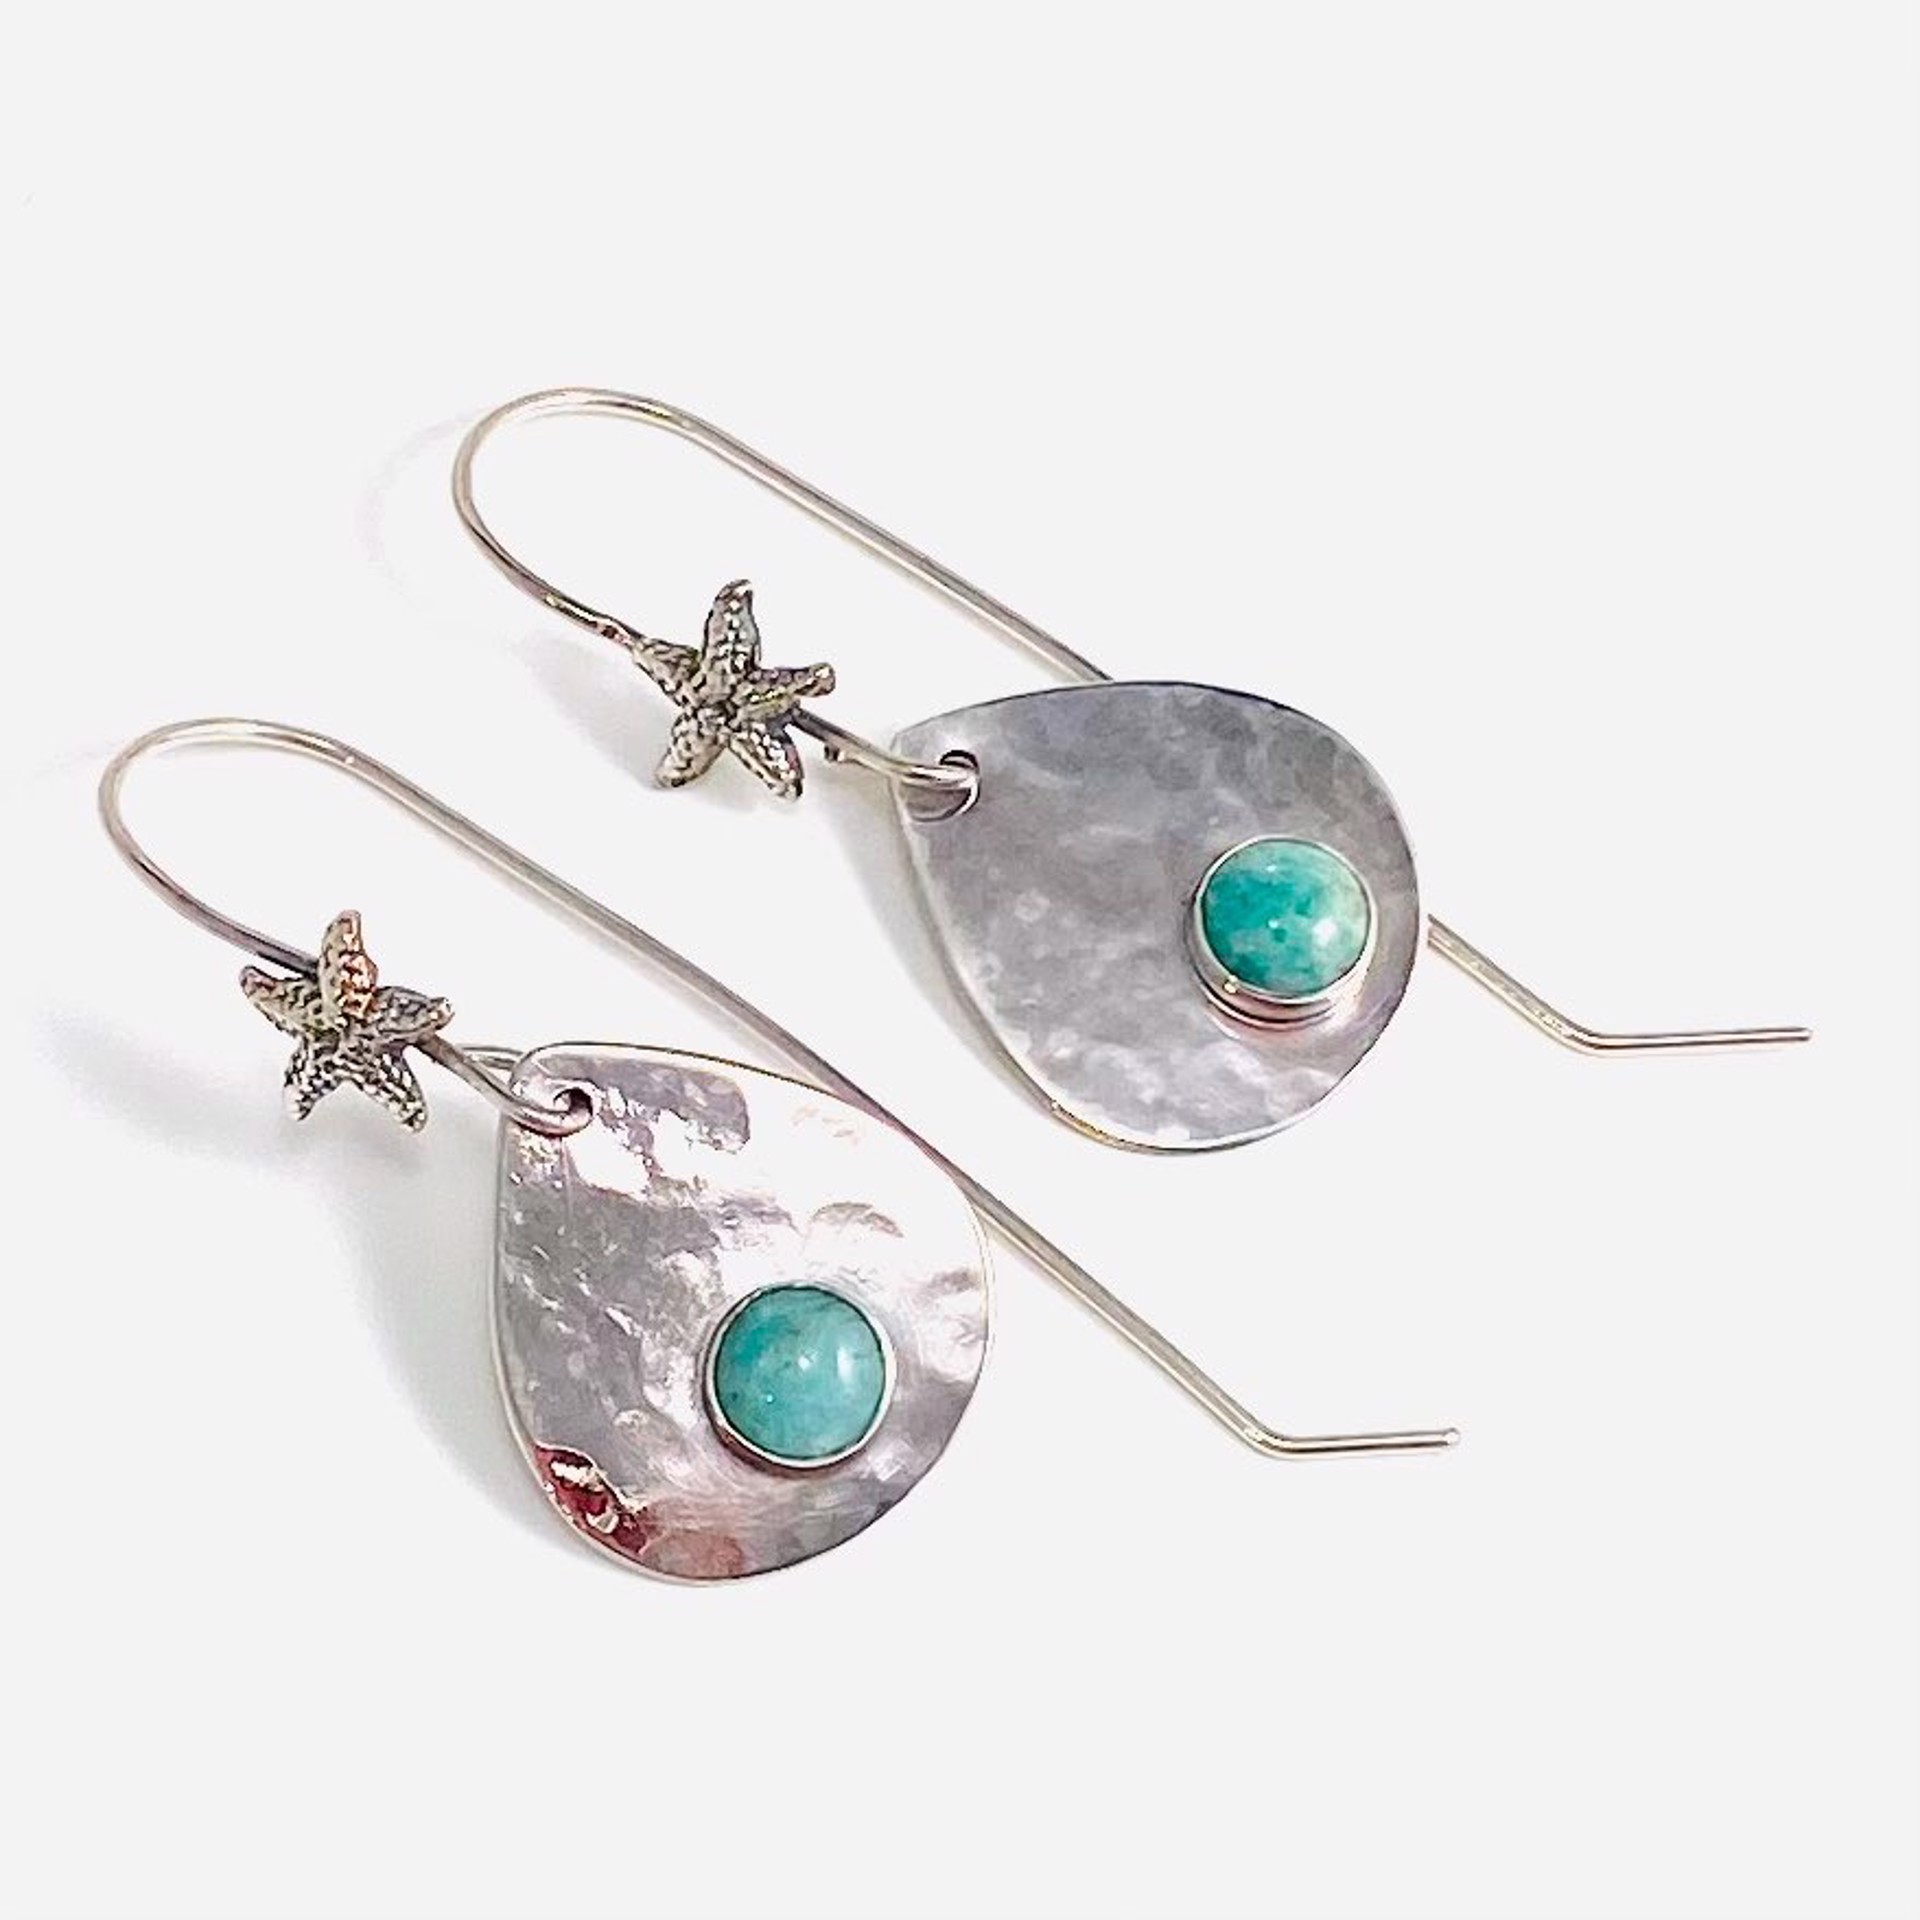 AB22-59 Small Hammered Teardrop Brazilian Amazonite Cabochon Starfish AccentEarrings by Anne Bivens